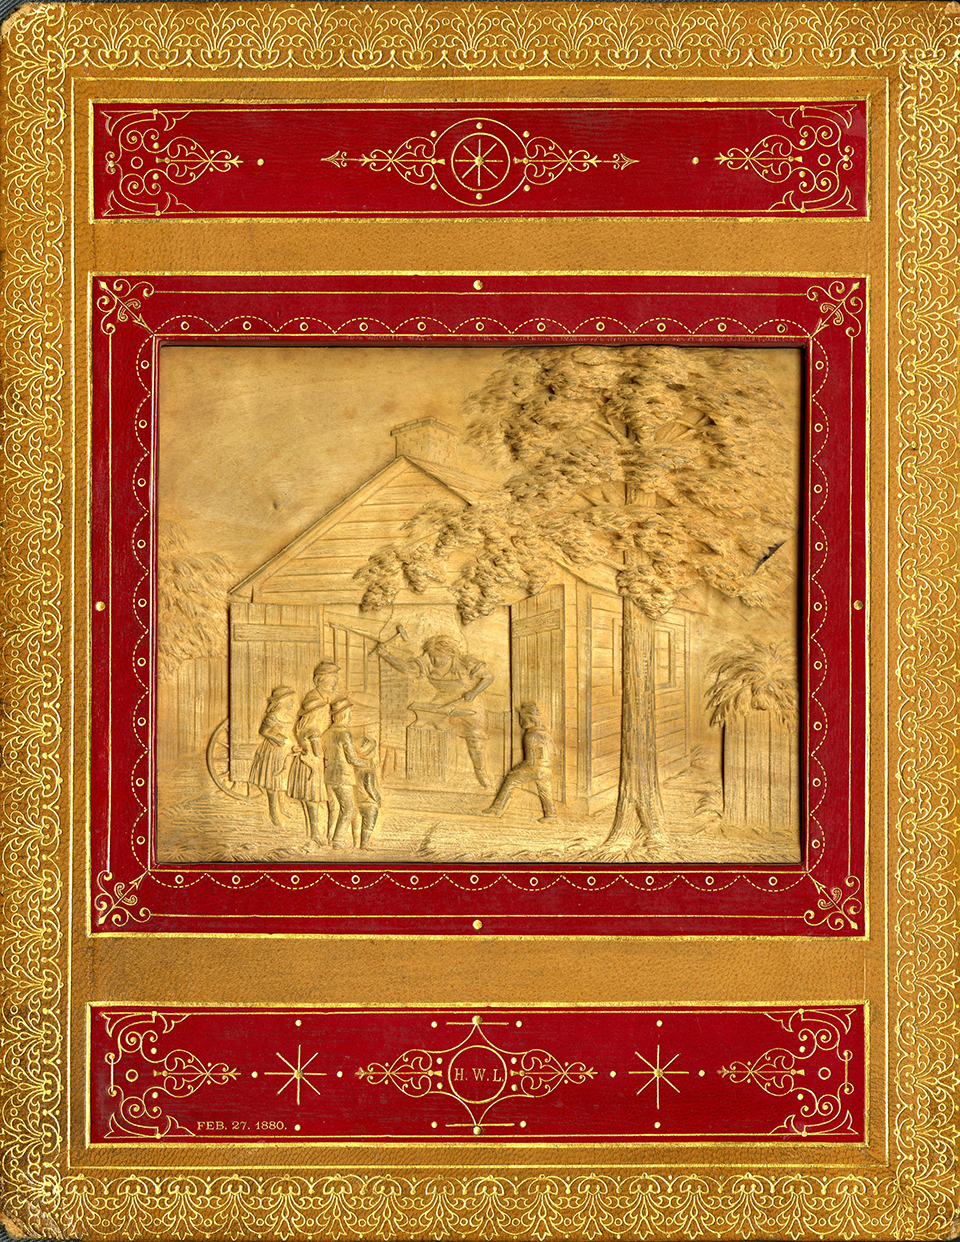 A carved wood scene from Longfellow's poem 